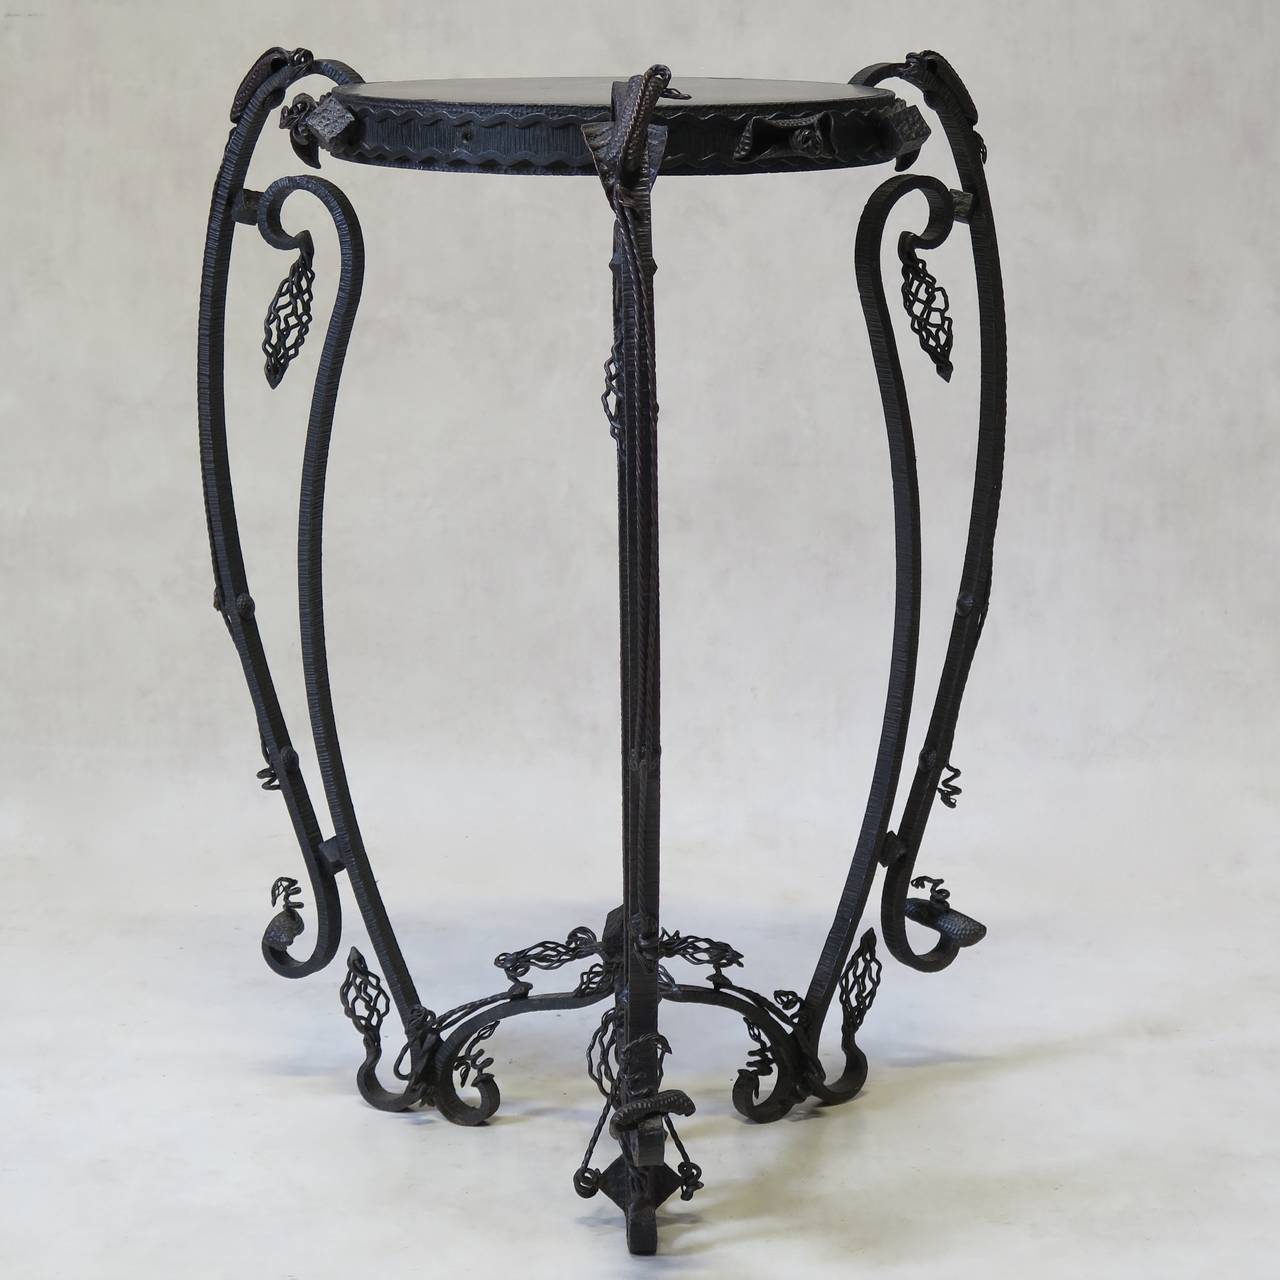 Lovely and rare side table in hand-wrought iron with naturalistic decor, mixing both Art Nouveau and Art Deco styles. Exquisitely made.